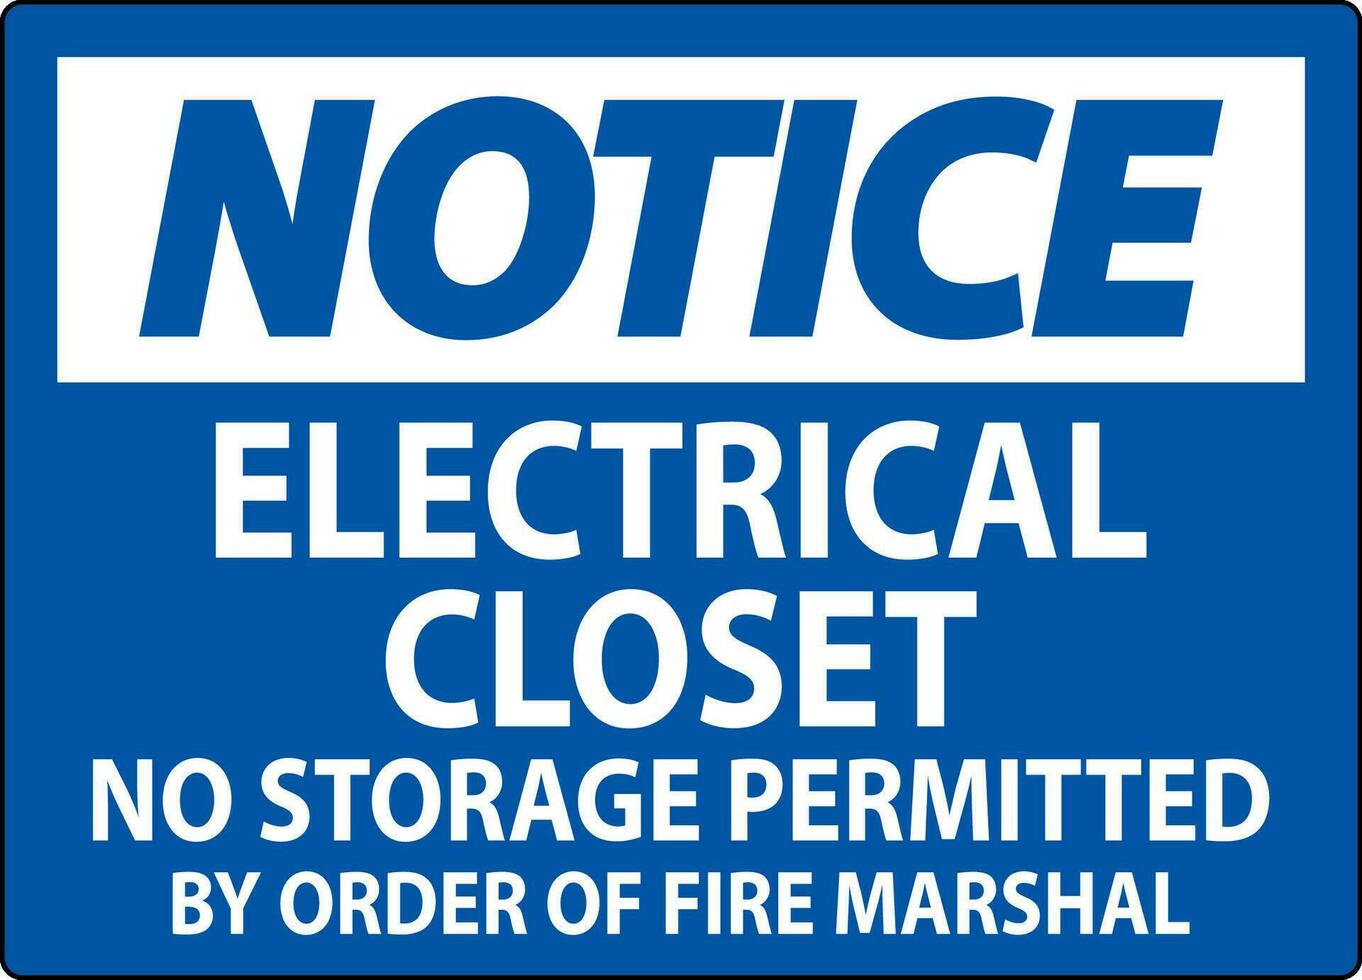 Notice Sign Electrical Closet - No Storage Permitted By Order Of Fire Marshal vector